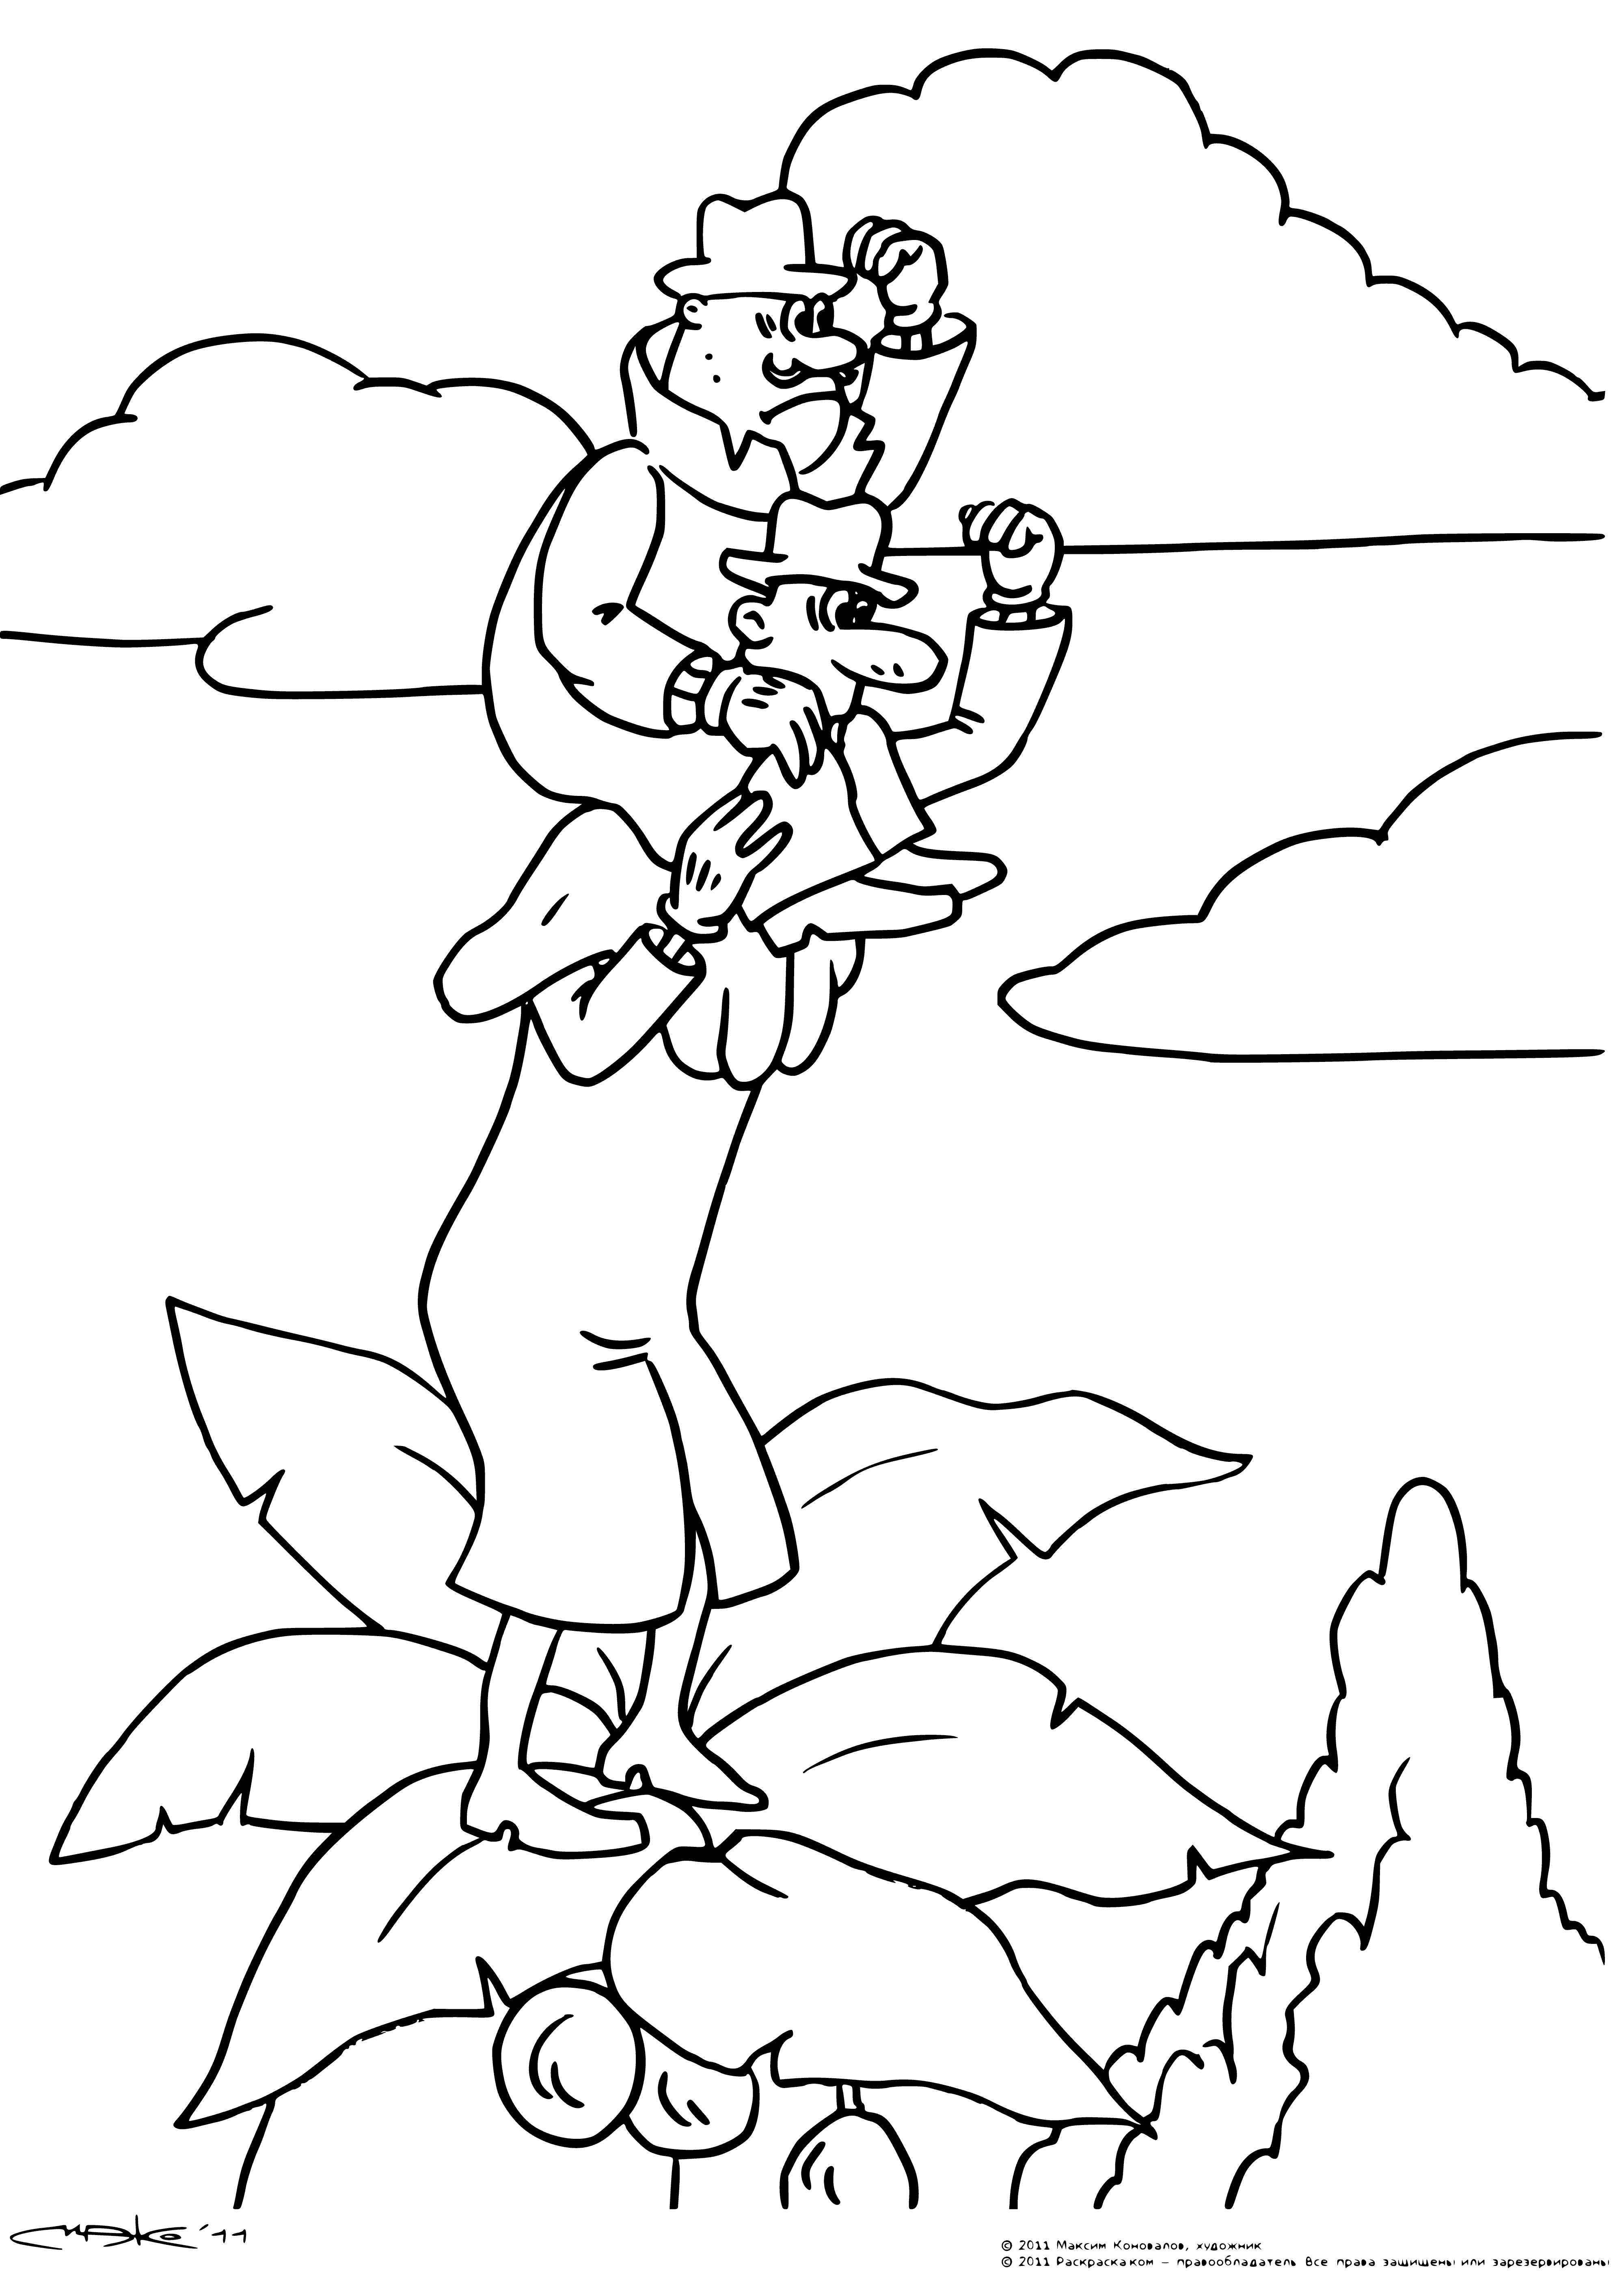 coloring page: Girl detective Funtik and her dog partner seek their next destination on an exciting adventure, examining a map.